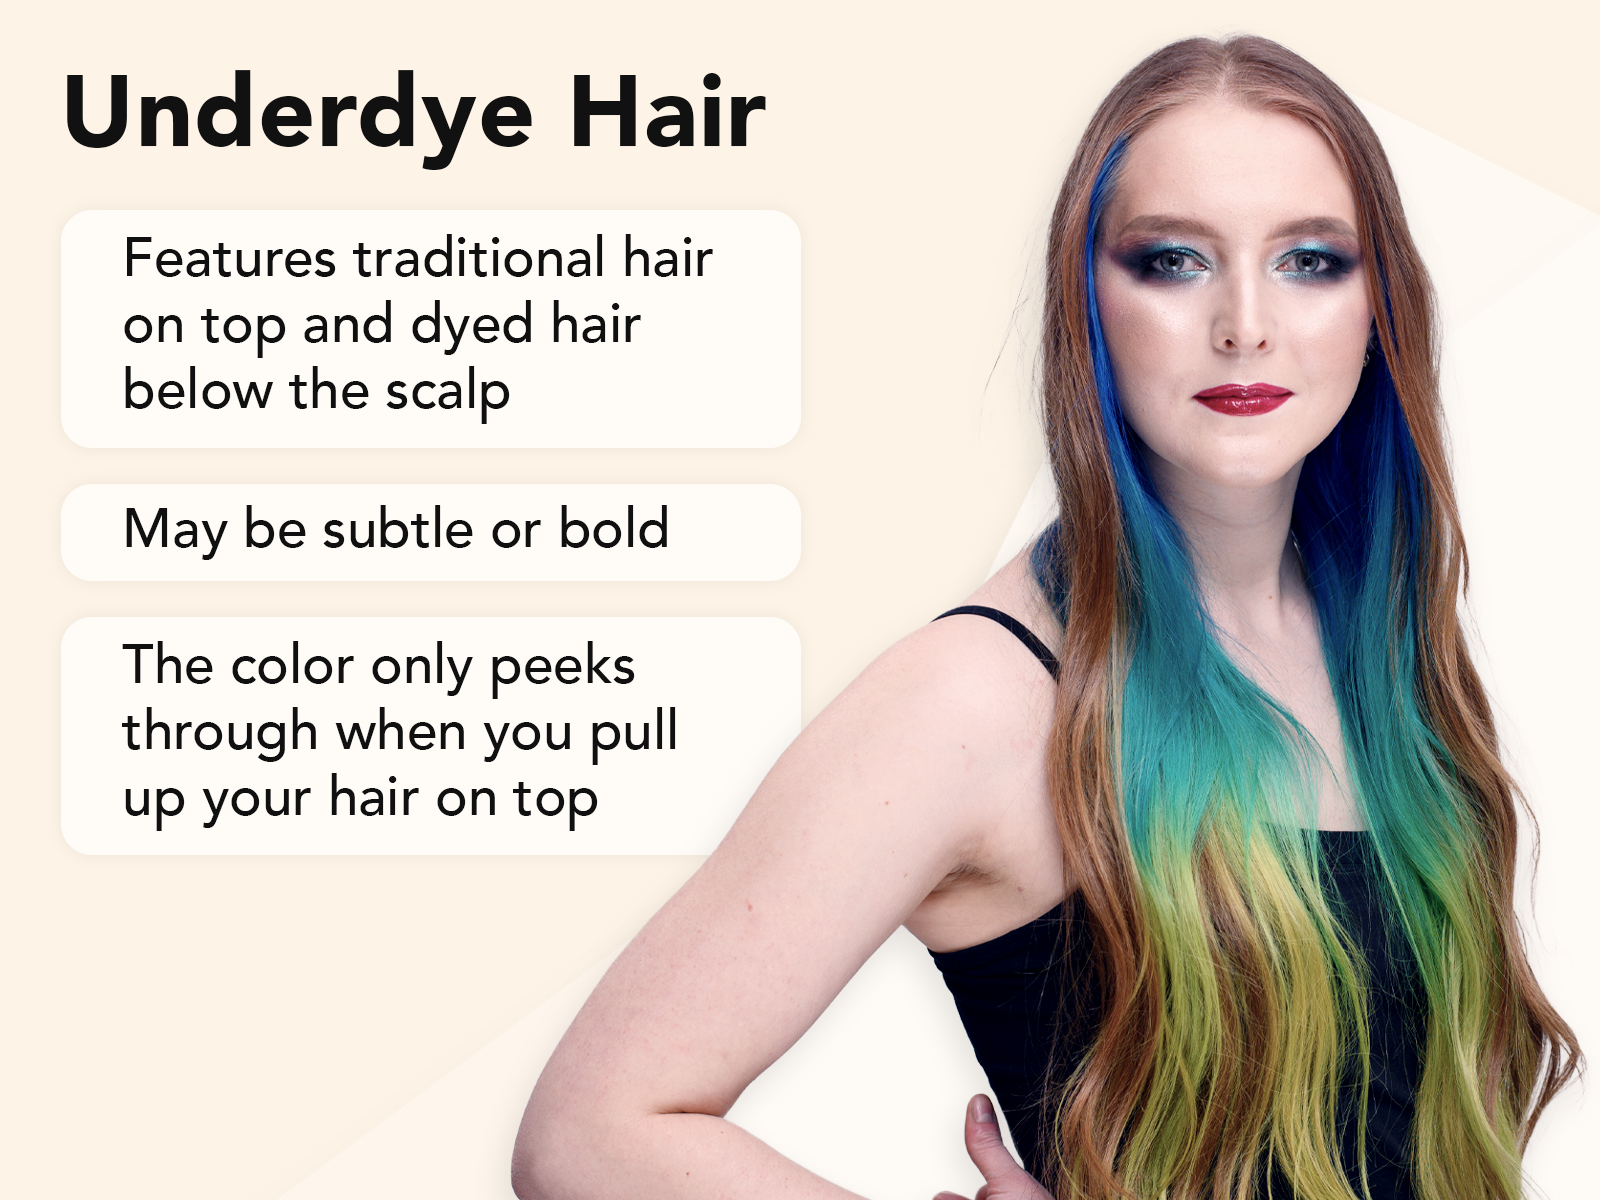 Underdye hair explainer image on a tan background